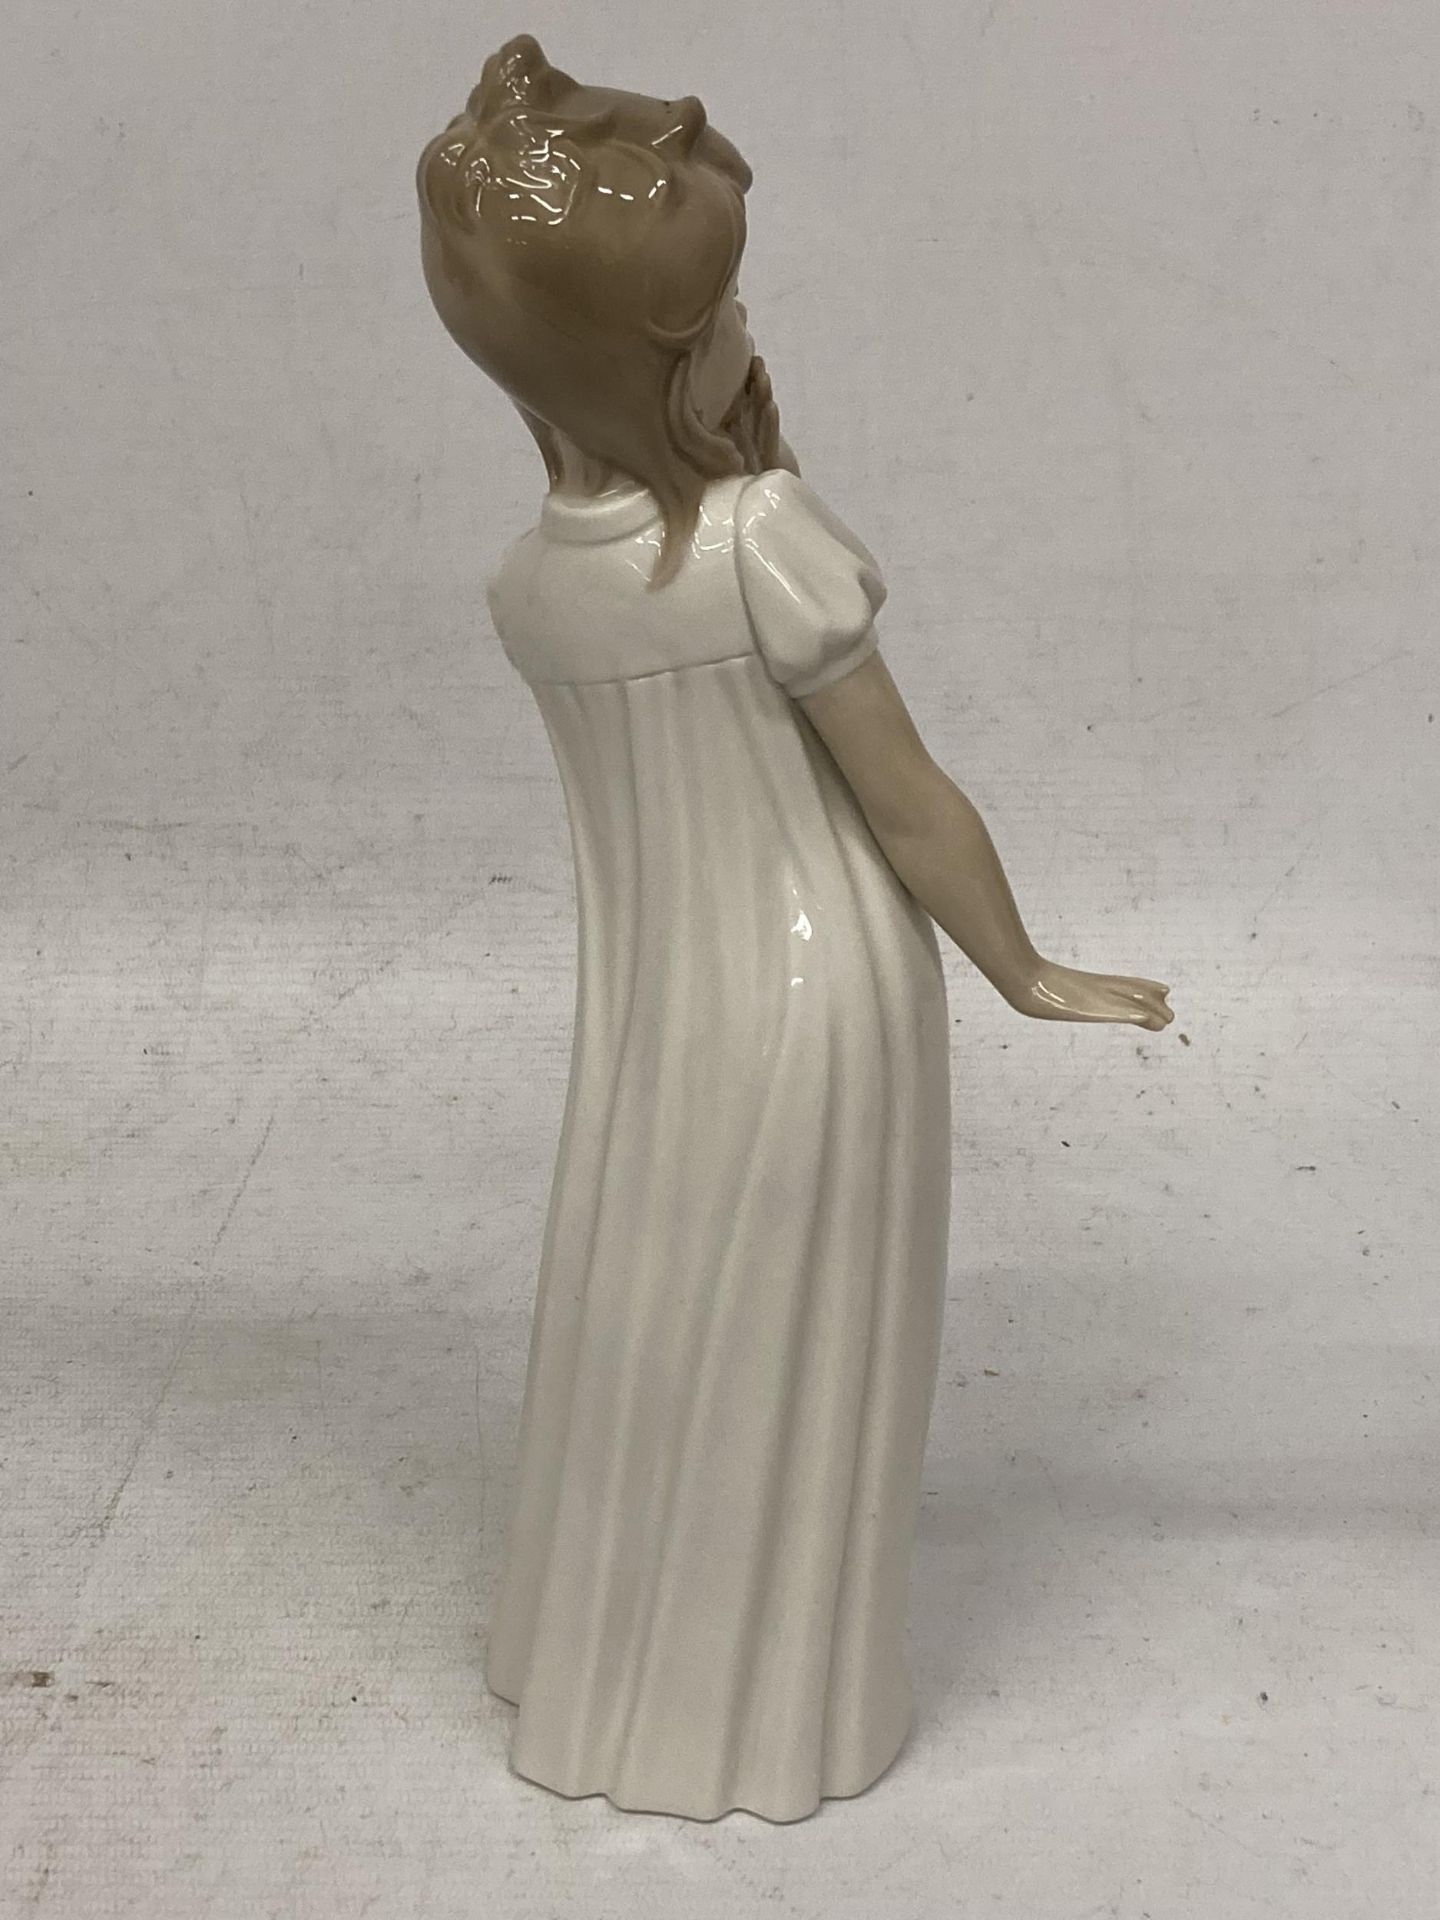 A NAO LLADRO FIGURE OF A GIRL YAWNING - Image 2 of 4